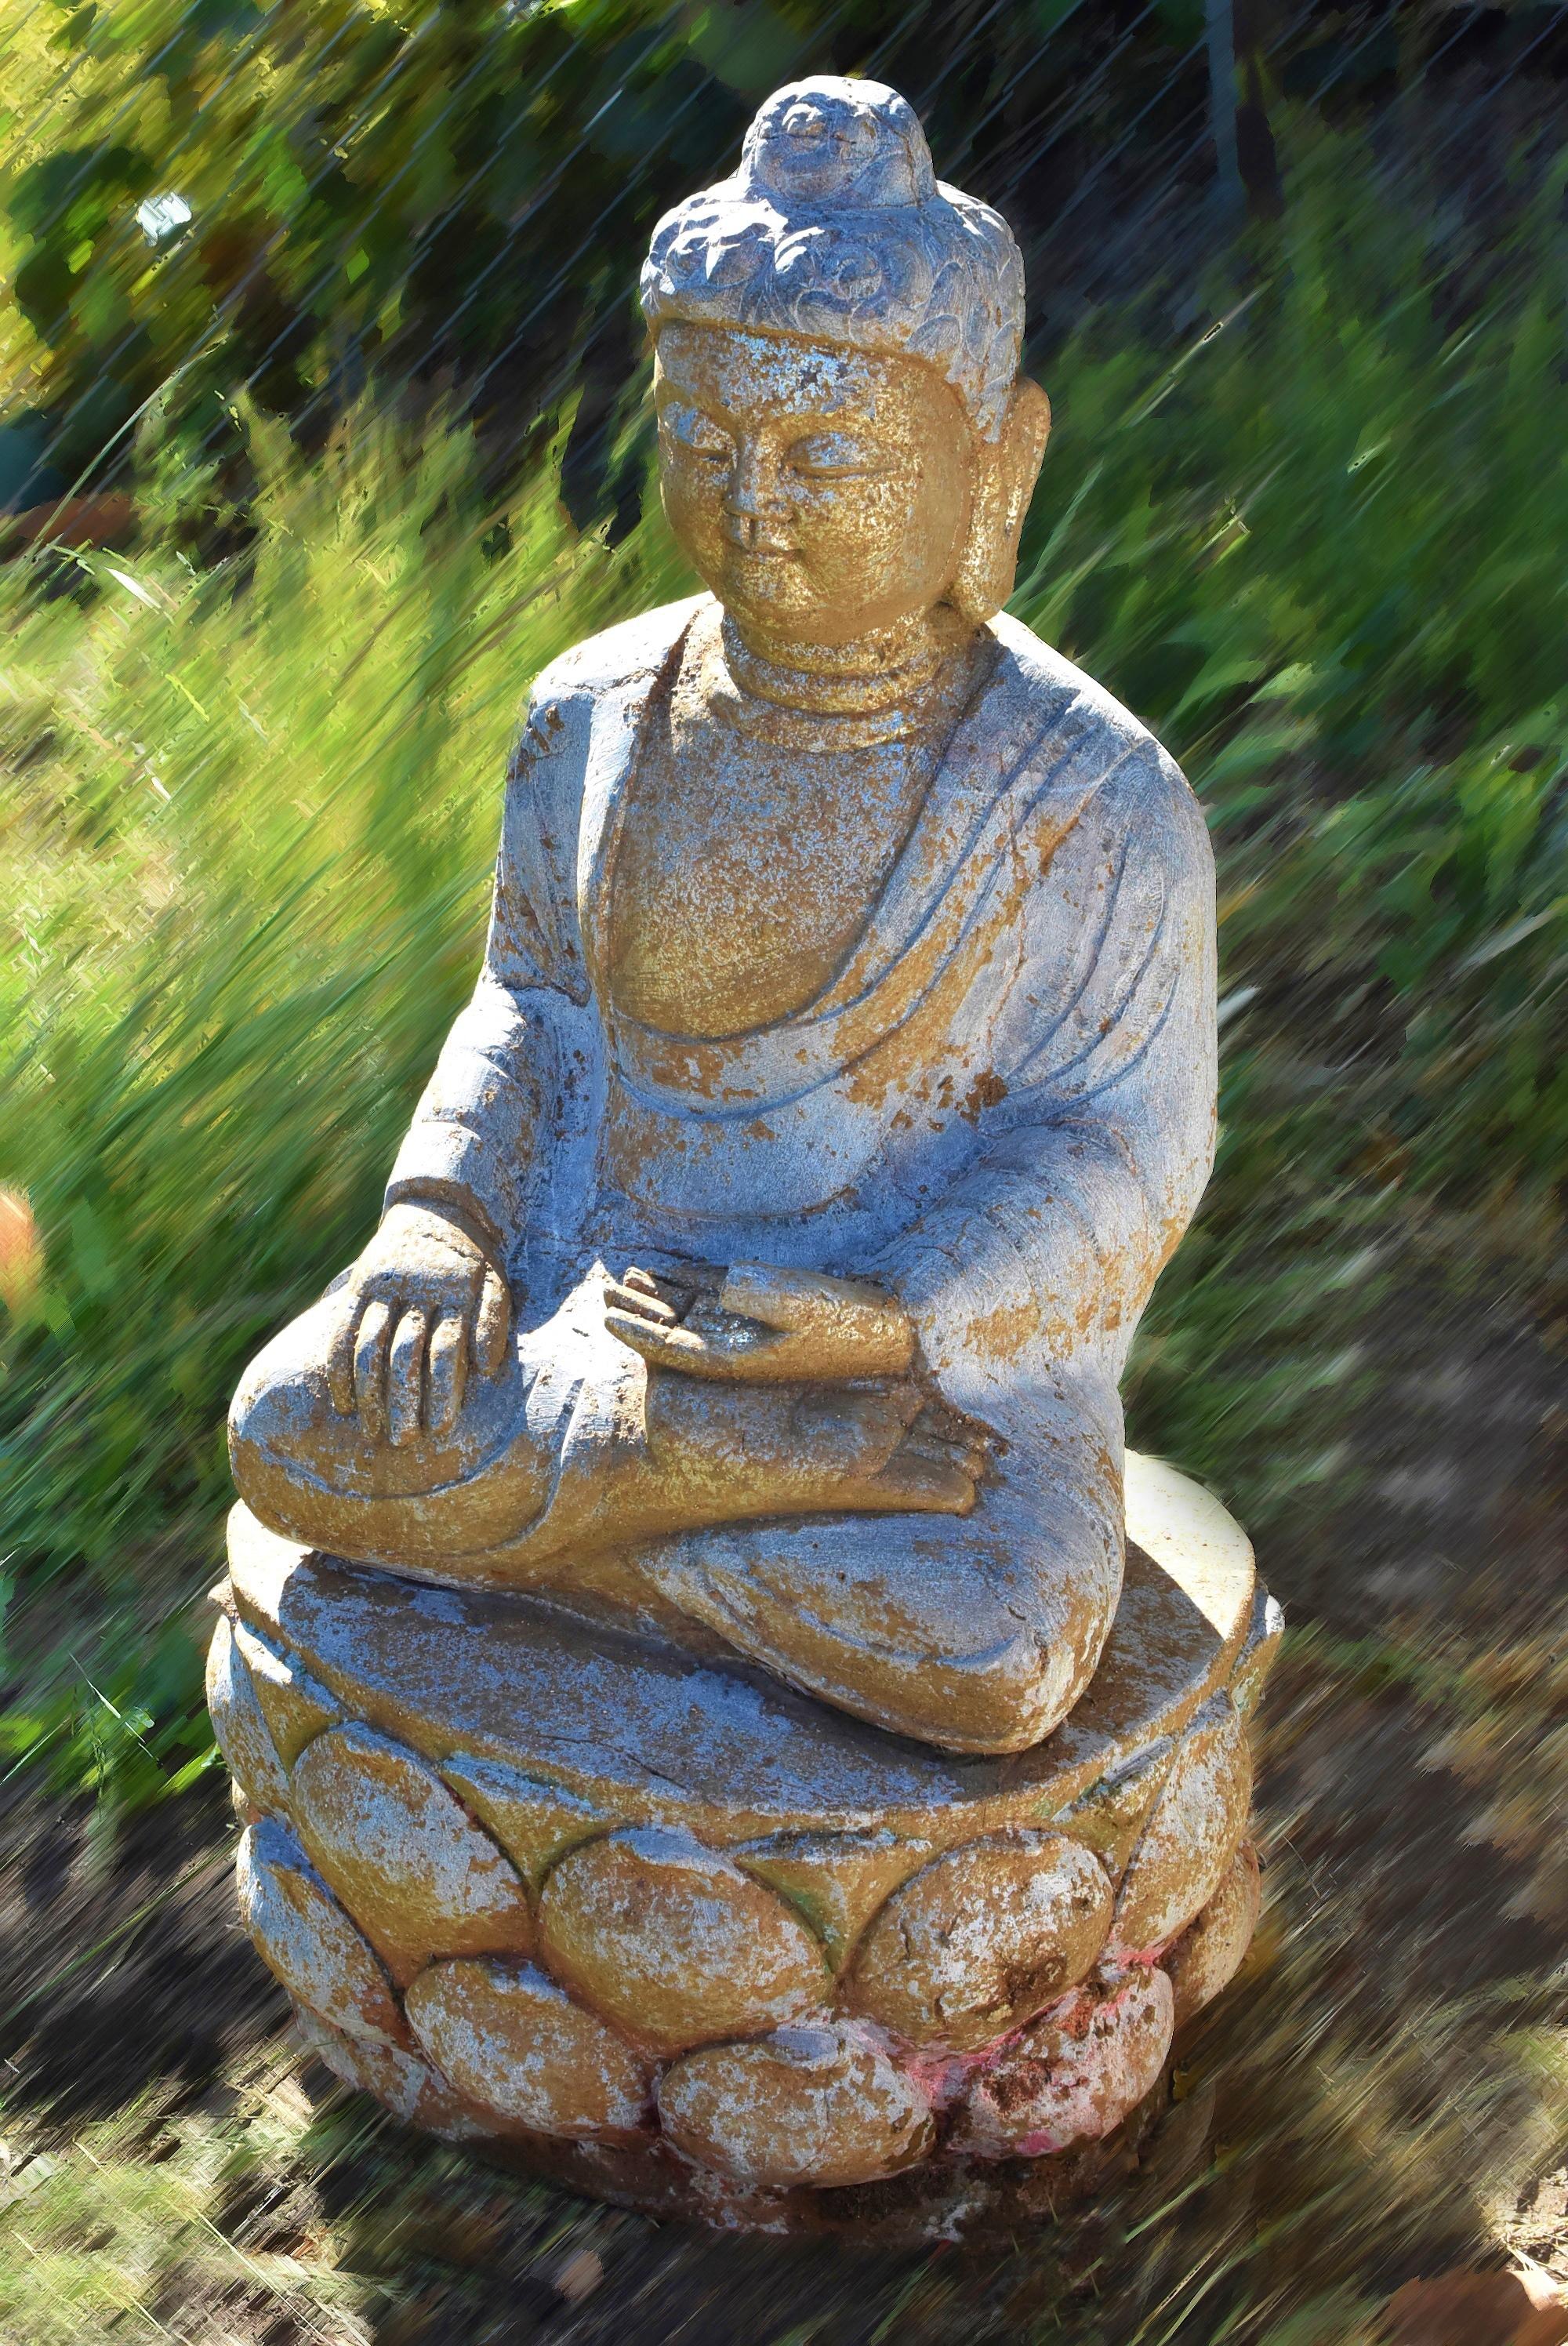 A beautiful hand carved statue of Buddha with golden face in the Tang style. Buddha is seated on a double lotus base, hands forming Bhumisparsha Mudra touching the earth symbolizing attaining enlightenment, dressed in a robe draping over shoulders